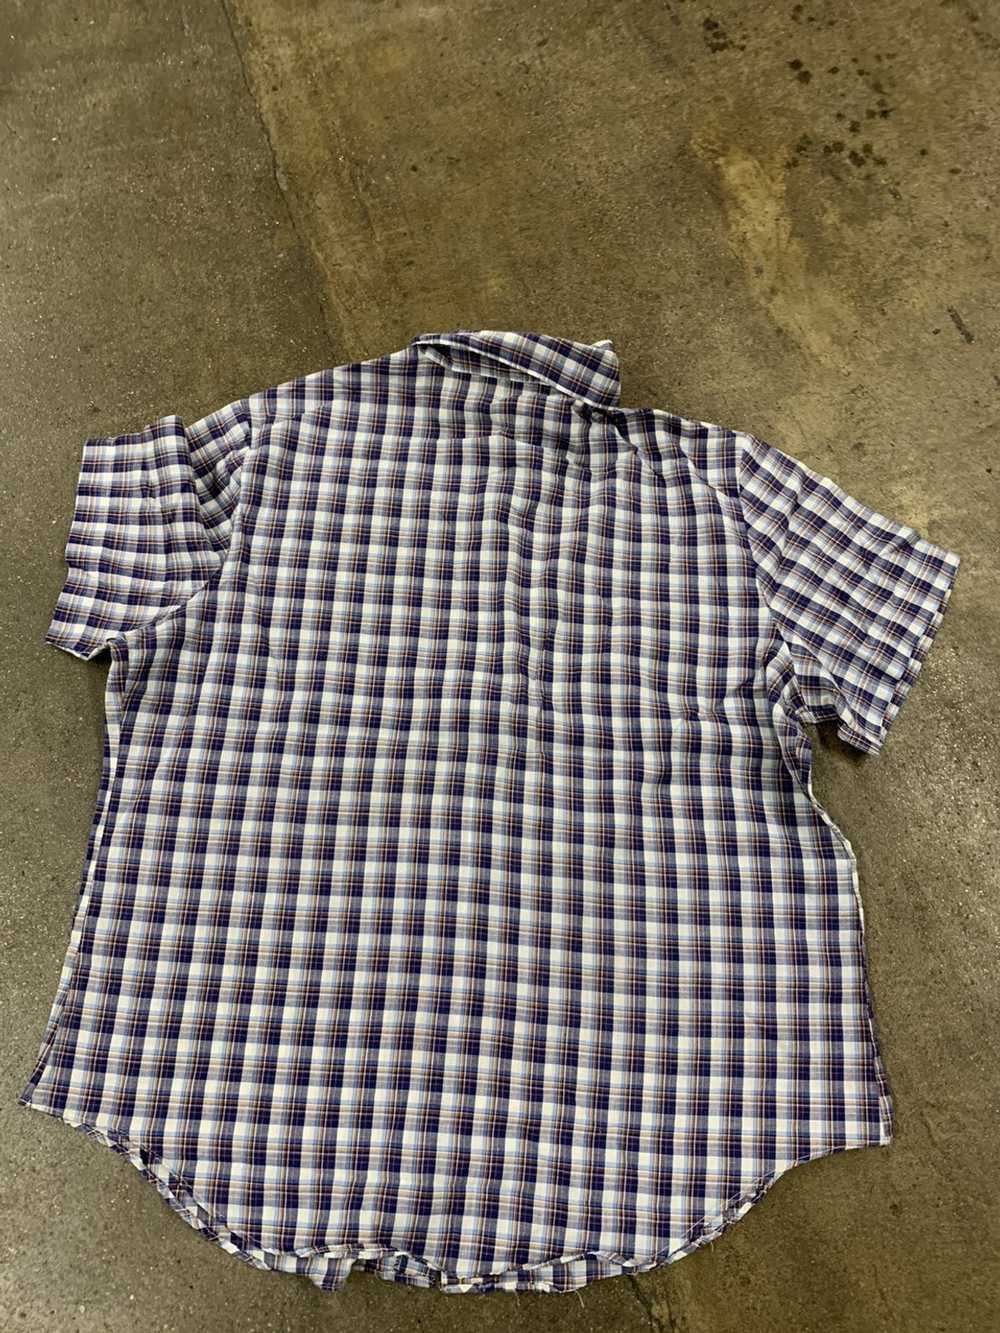 Vintage Vintage 80s/90s Sears Checker Button Up - image 3